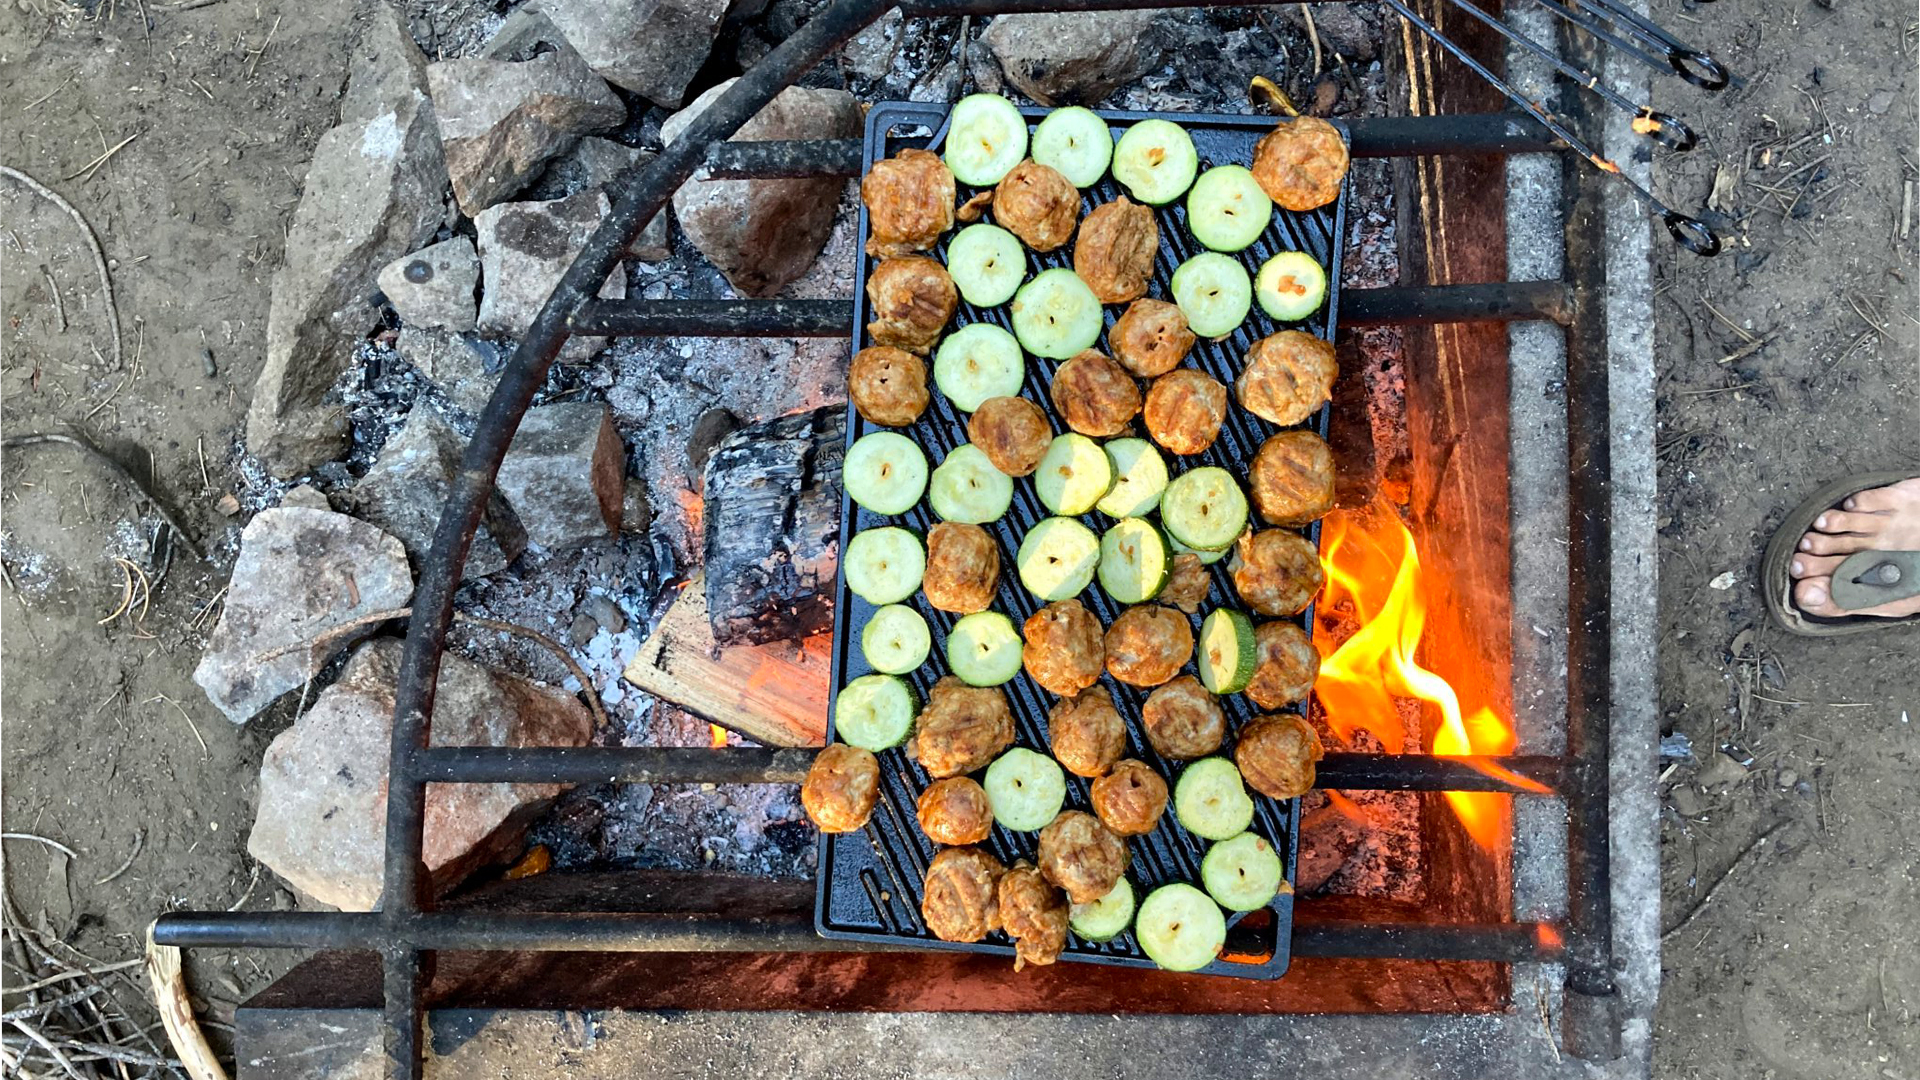 Vegetables cooking on a grill over a fire.